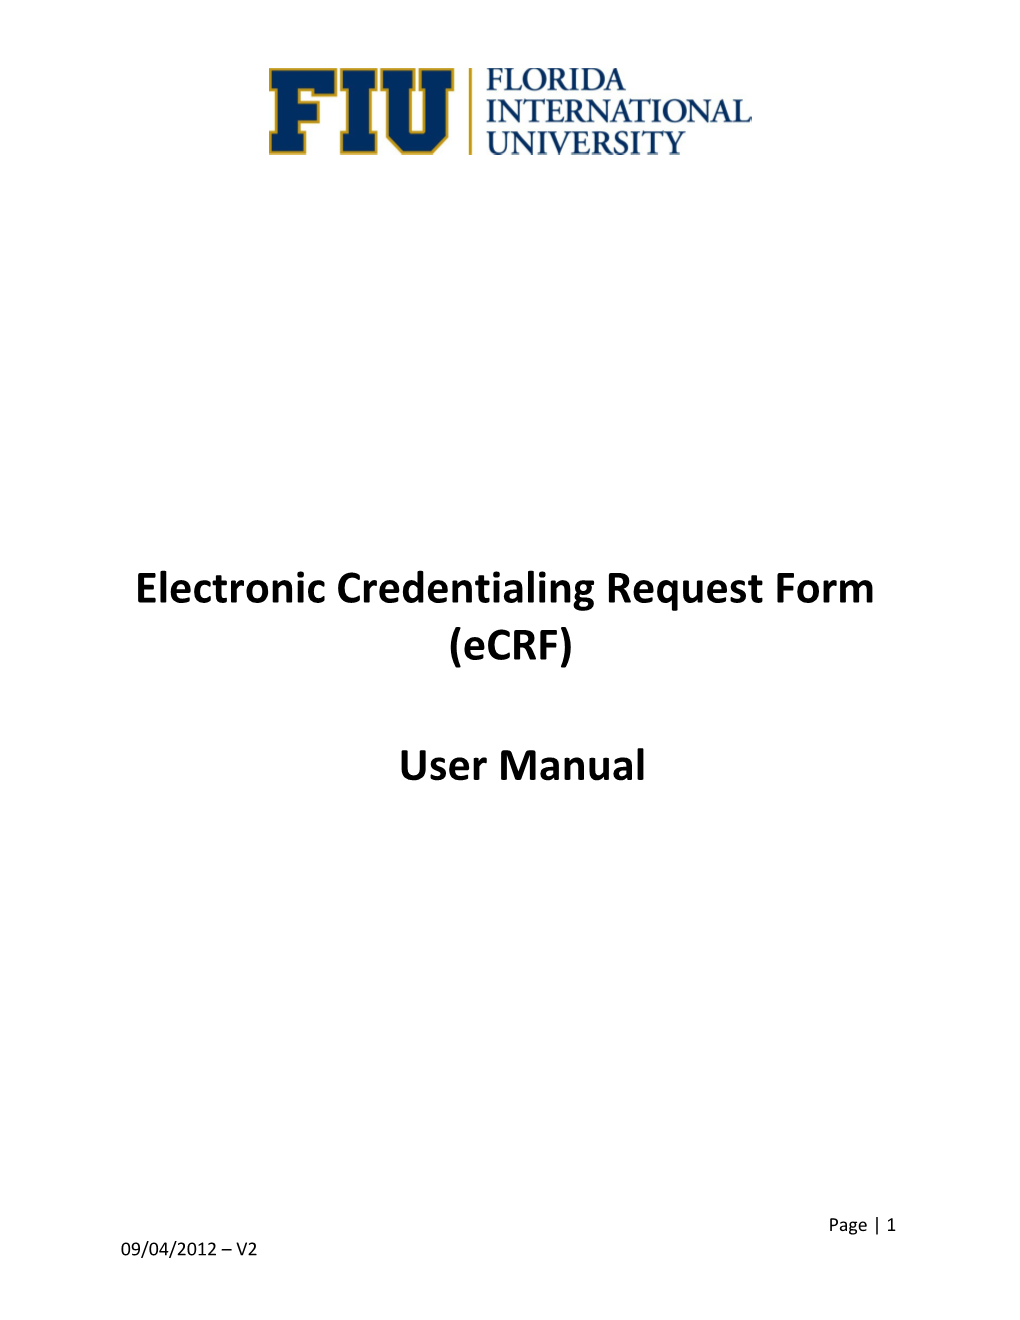 Electronic Credentialing Request Form